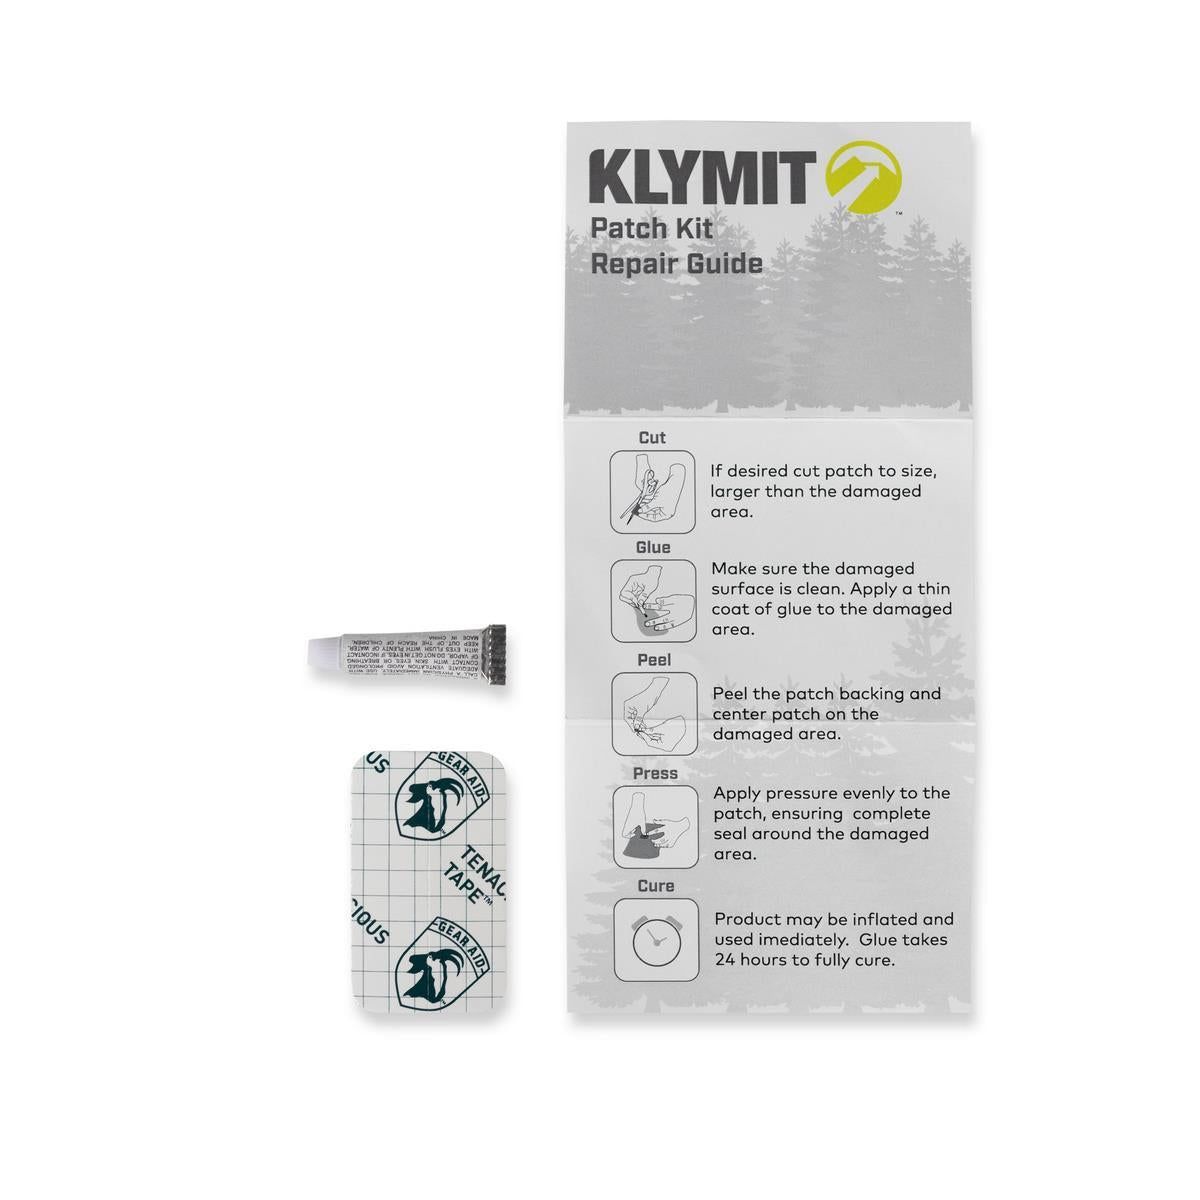 Klymit Patch and Repair Kit